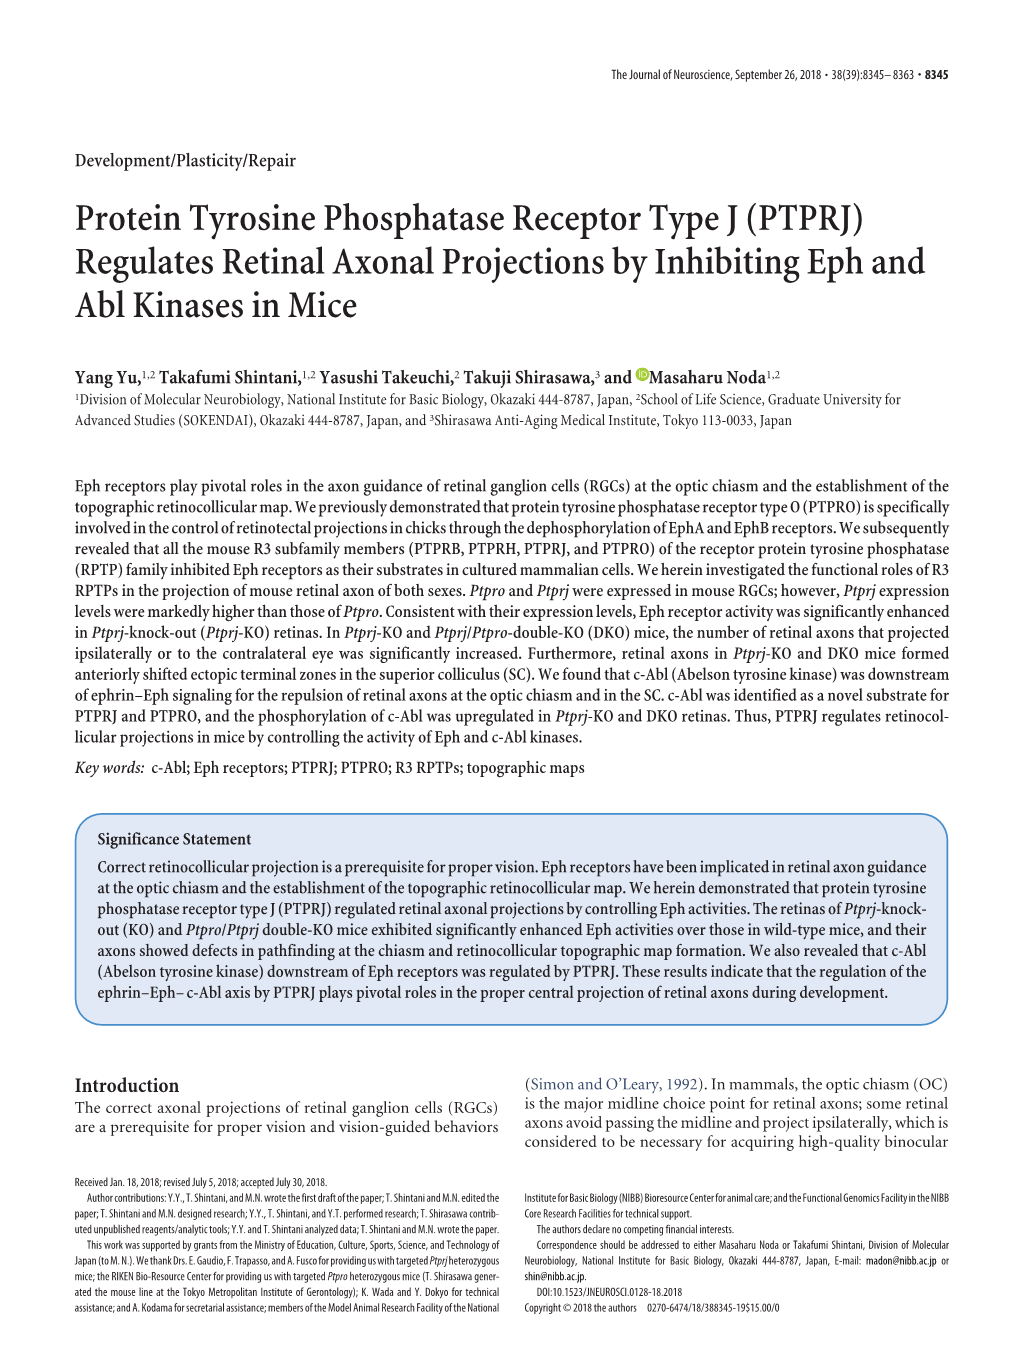 Protein Tyrosine Phosphatase Receptor Type J (PTPRJ) Regulates Retinal Axonal Projections by Inhibiting Eph and Abl Kinases in Mice